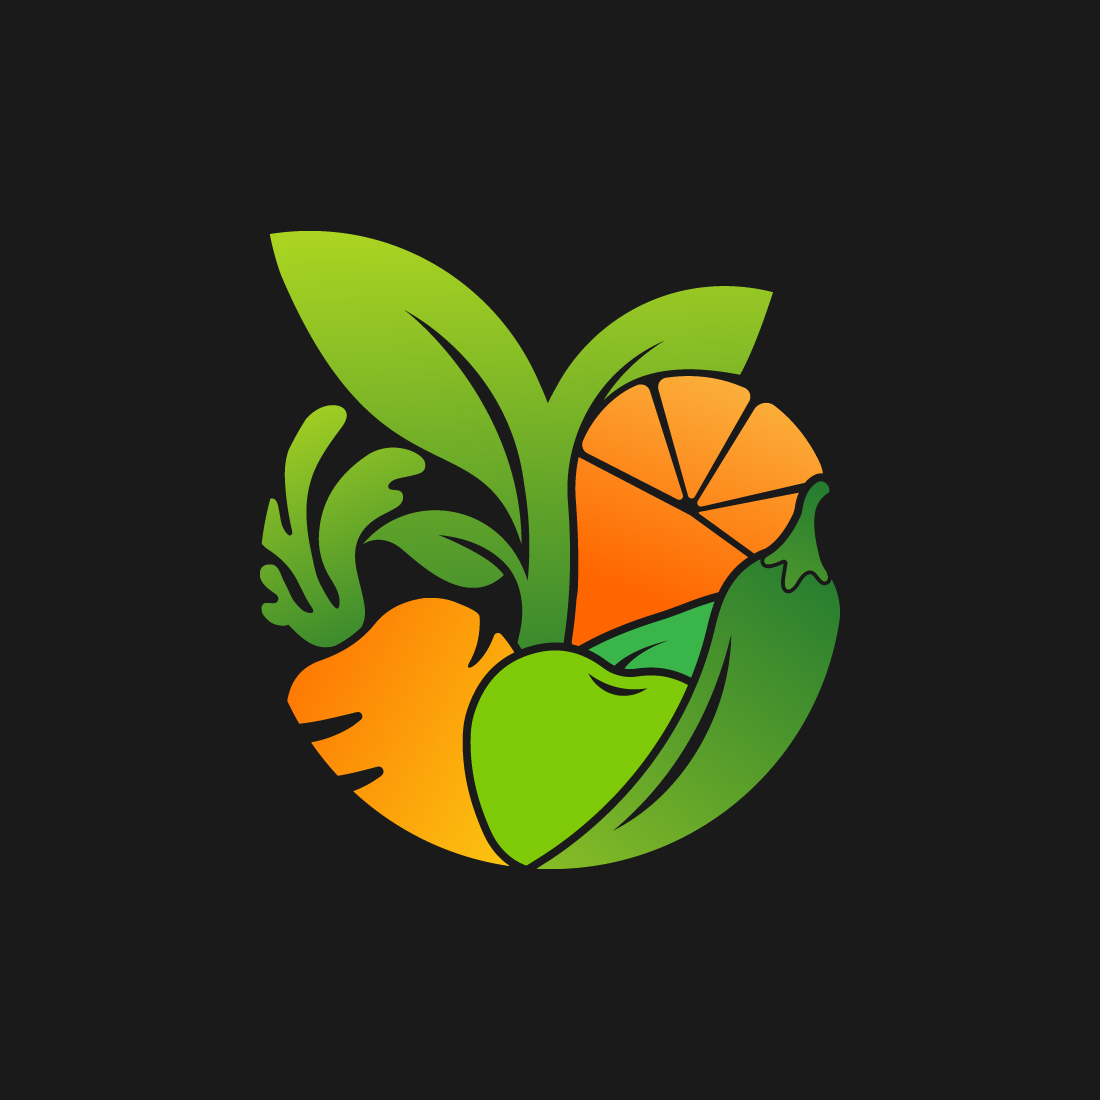 Fruit and food logo design cover image.